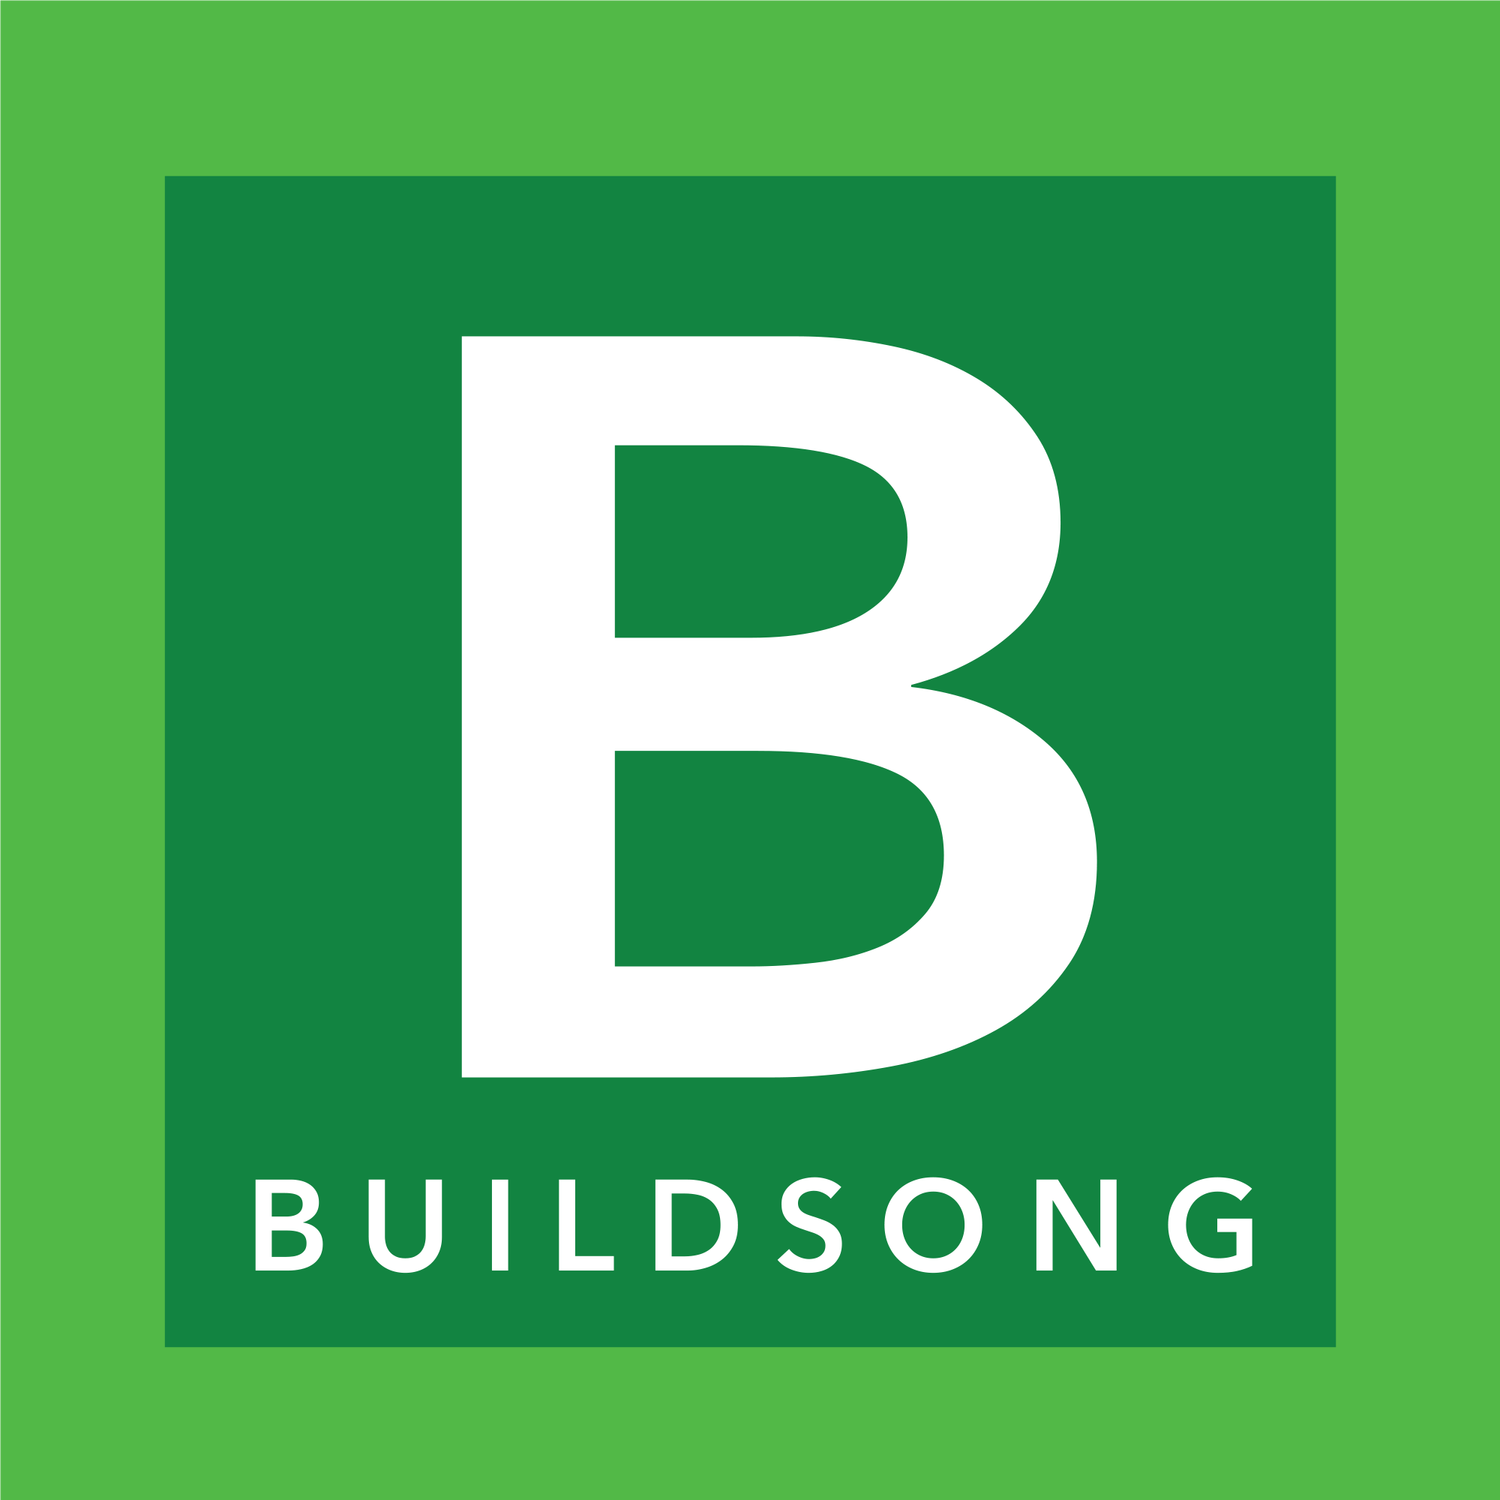 Buildsong